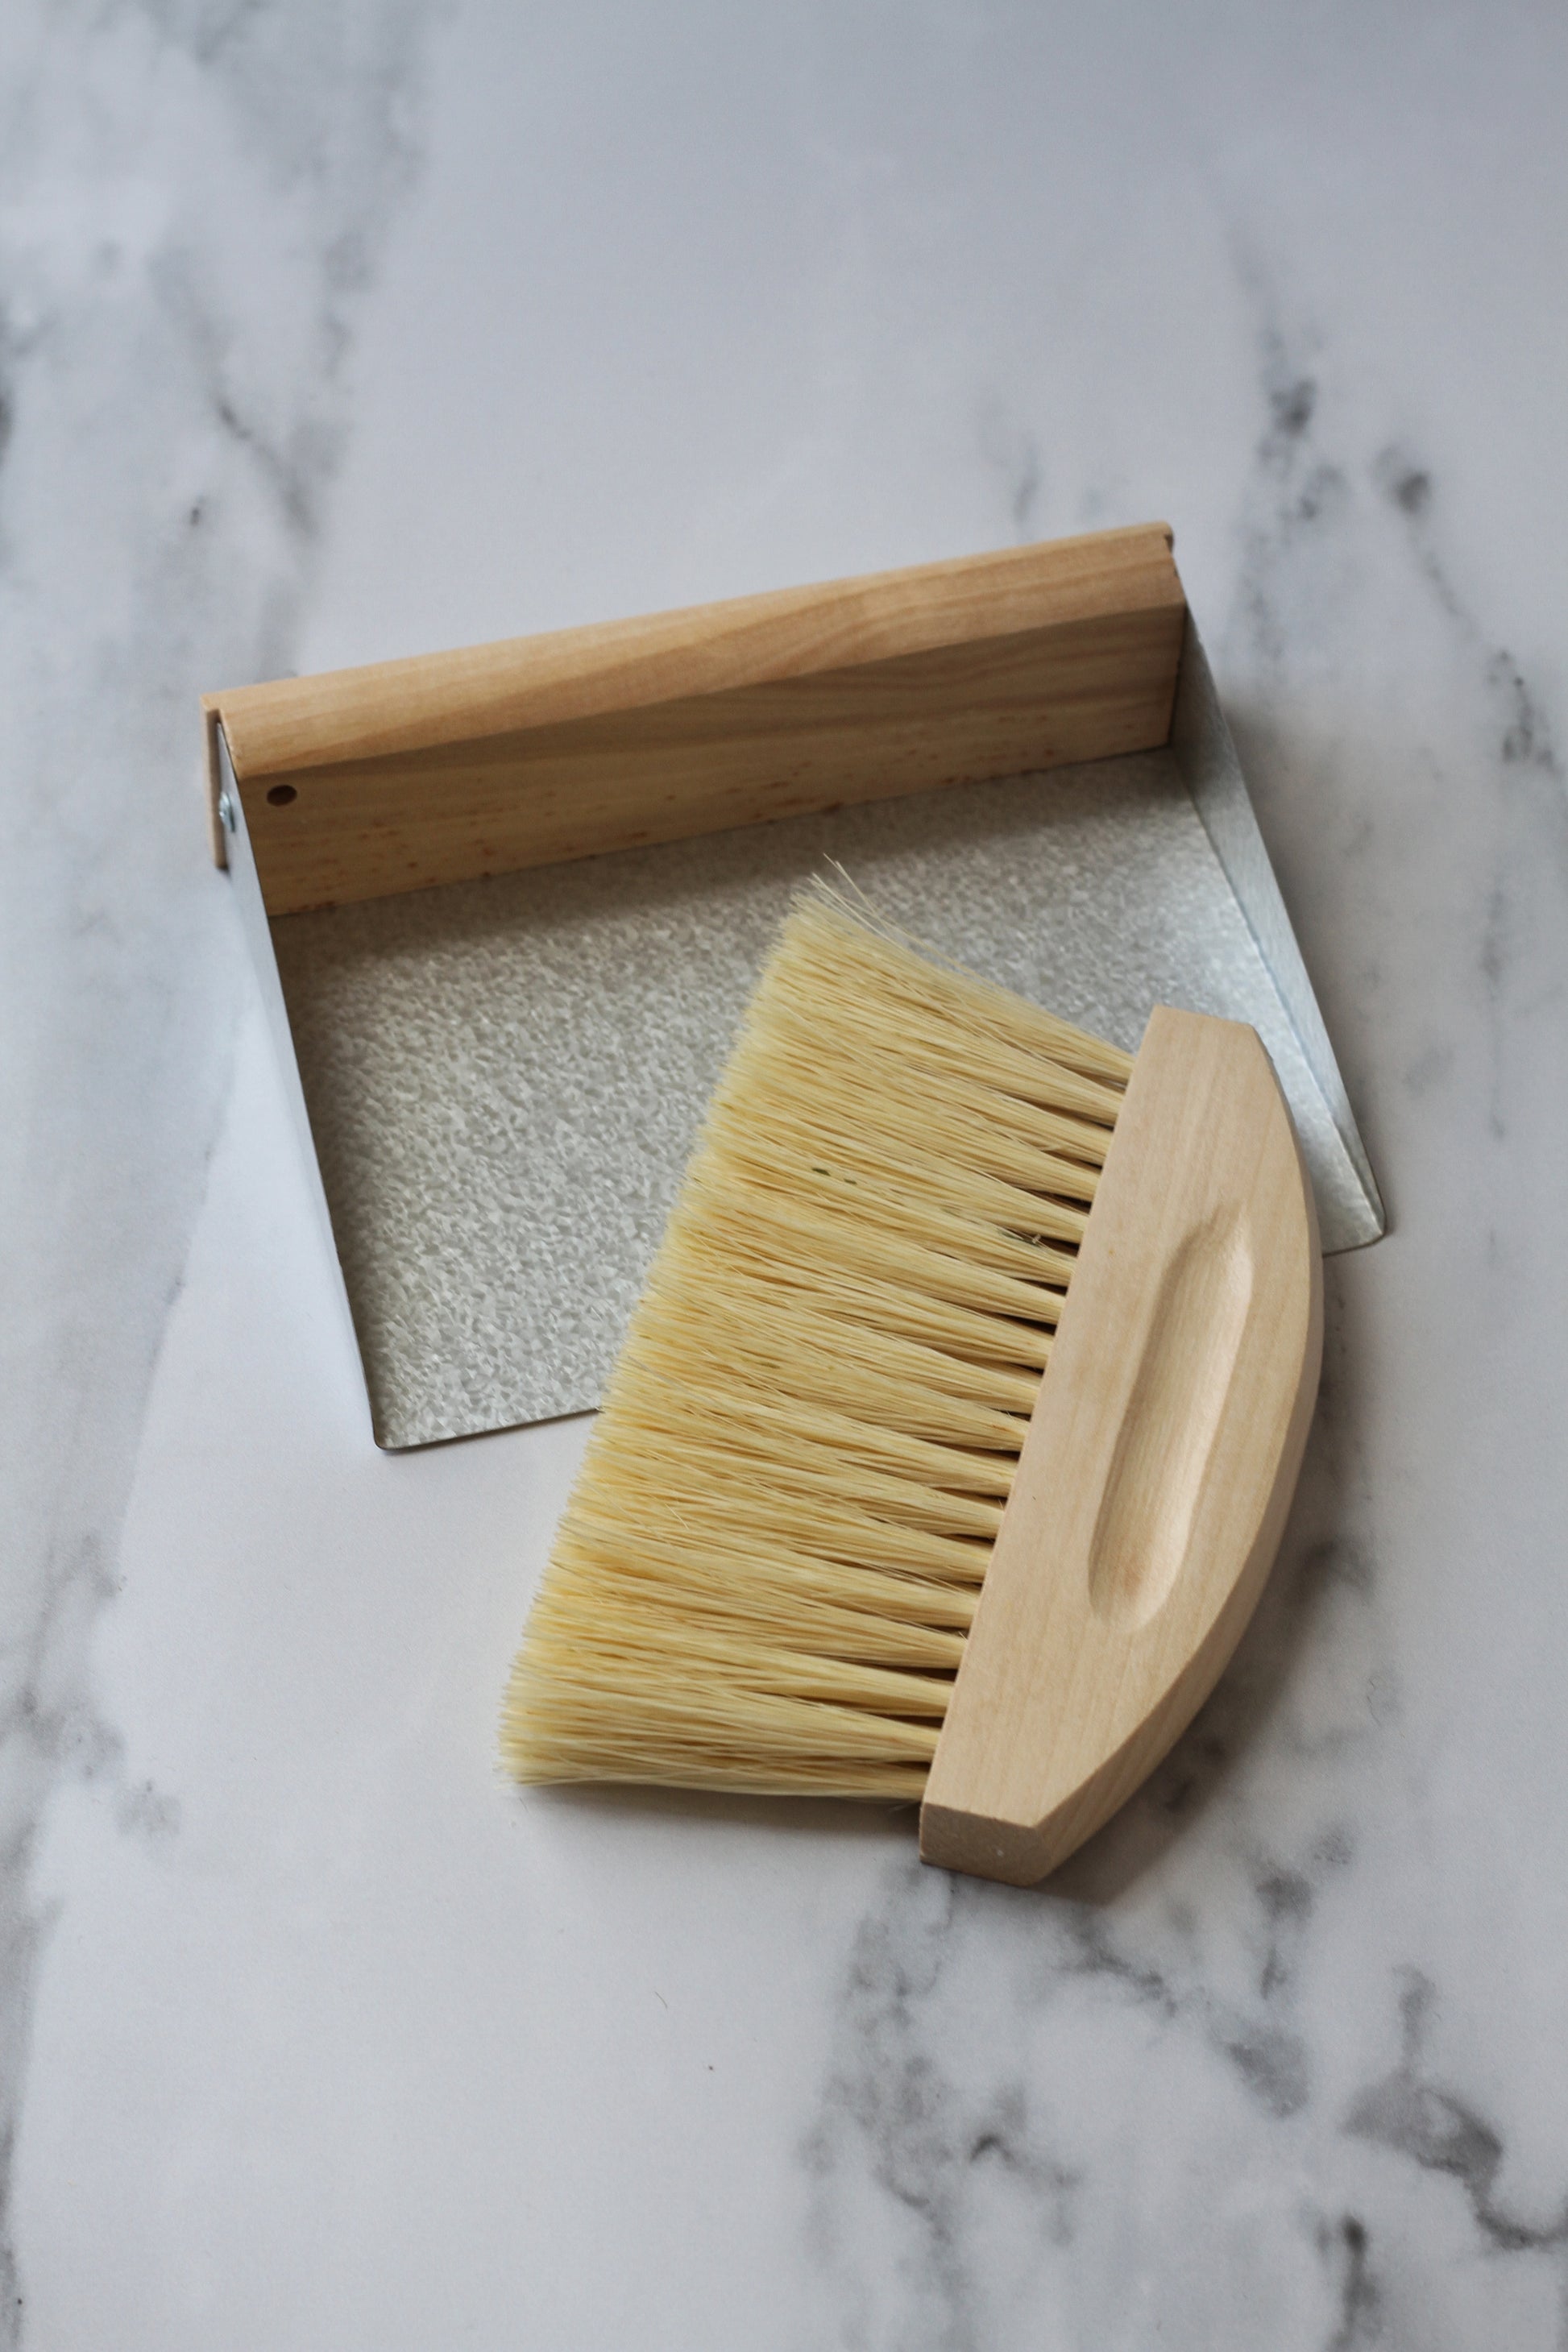 wood and metal table brush and pan set magnetic to keep them stored away together